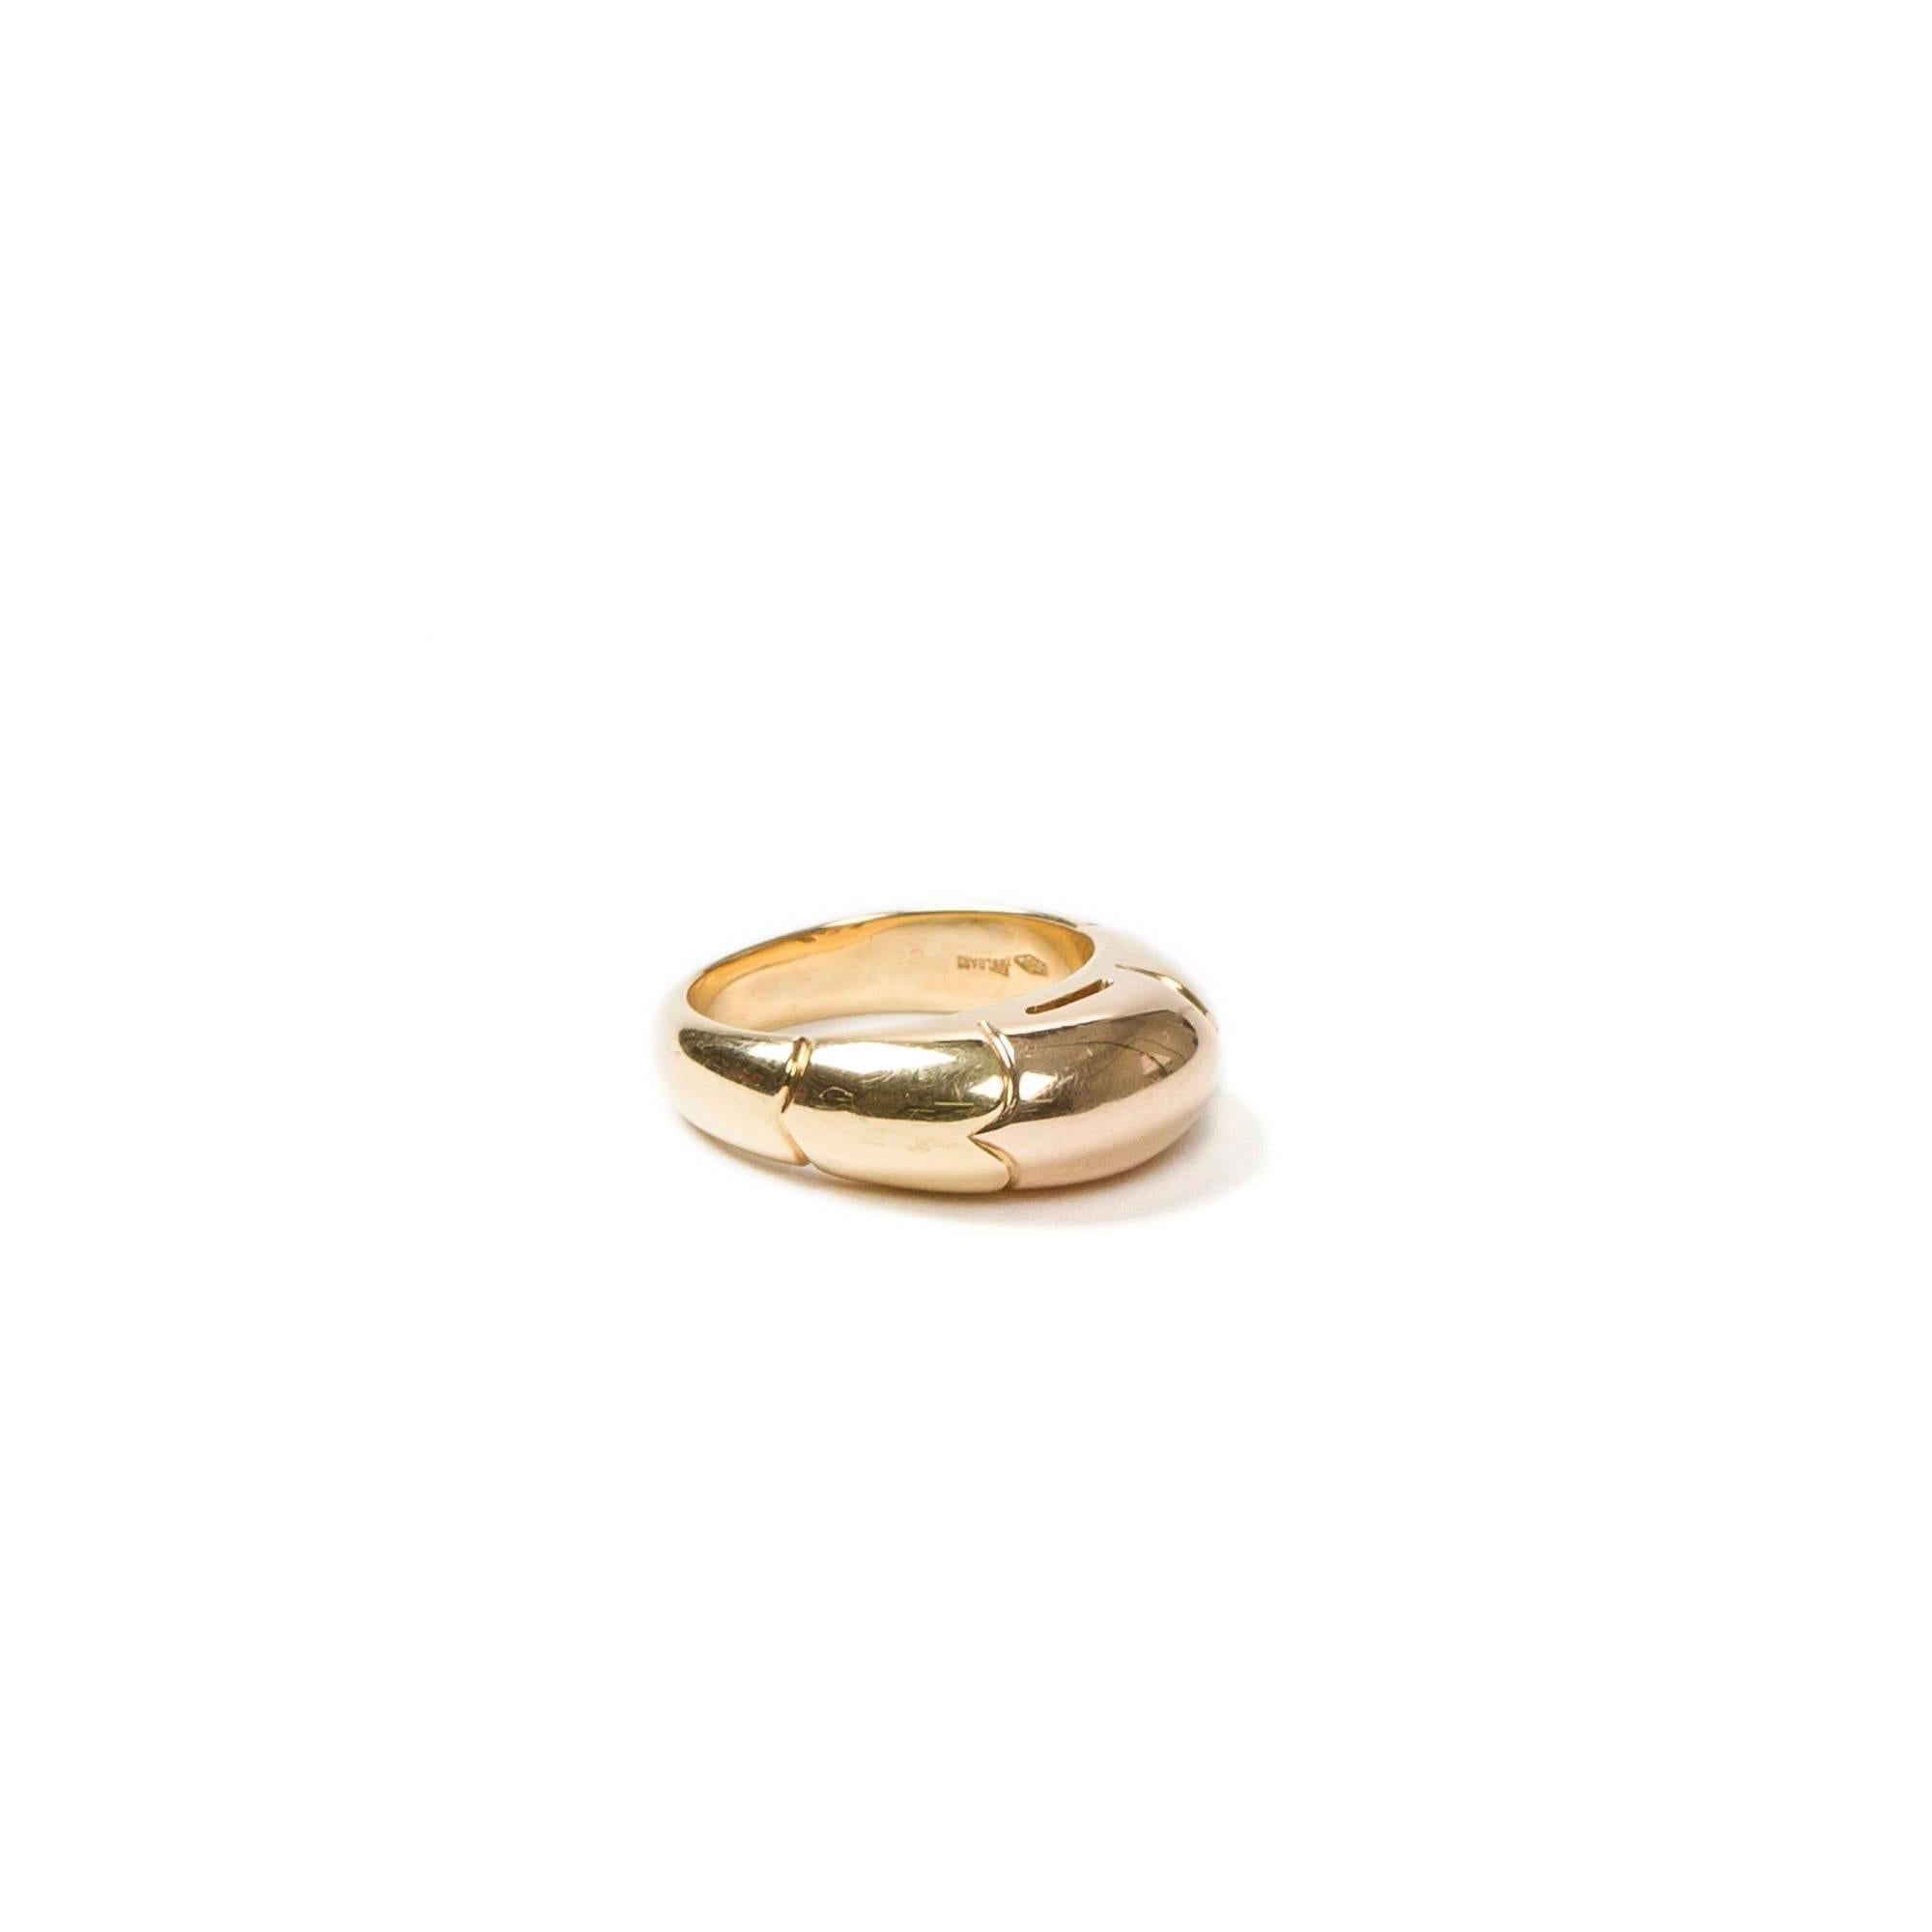 Tronchetto Ring in 750 yellow and pink gold. Hallmarks inside the ring 